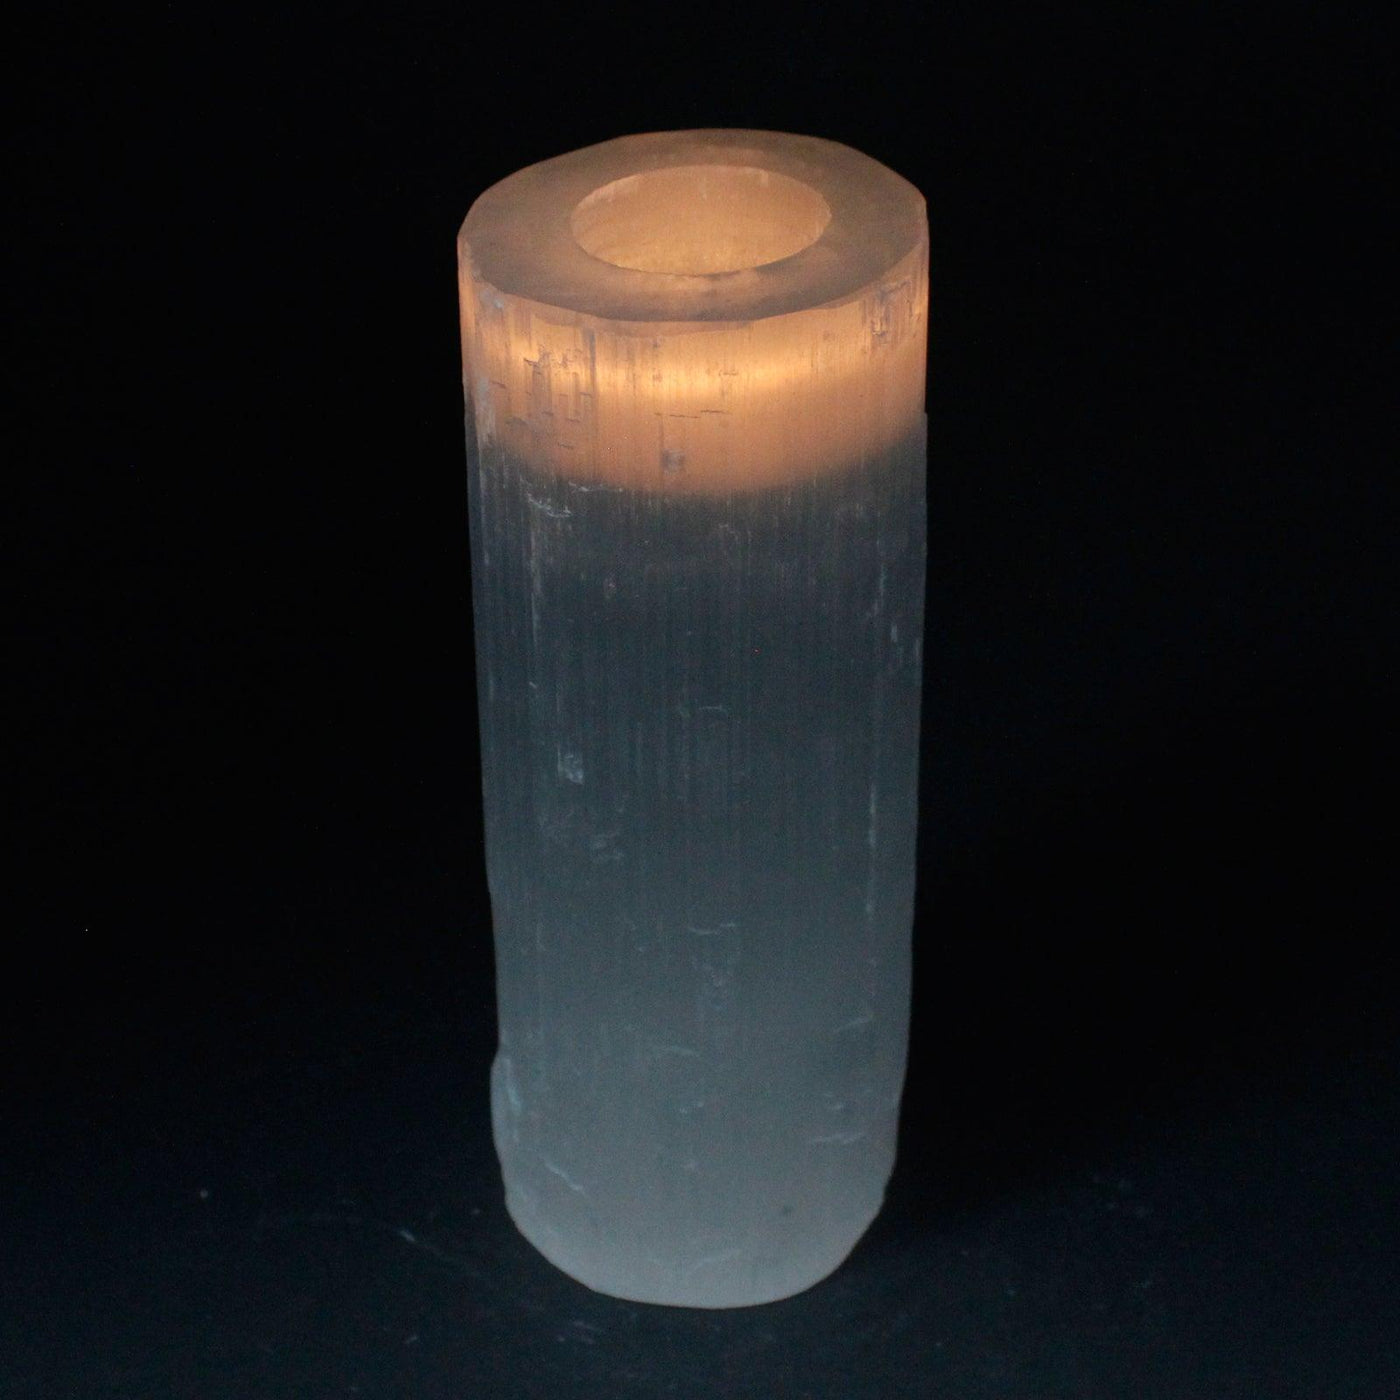 Large Selenite Natural Stone Cylinder Garden Home Candle Tealight Holders 8,10,15,20cm